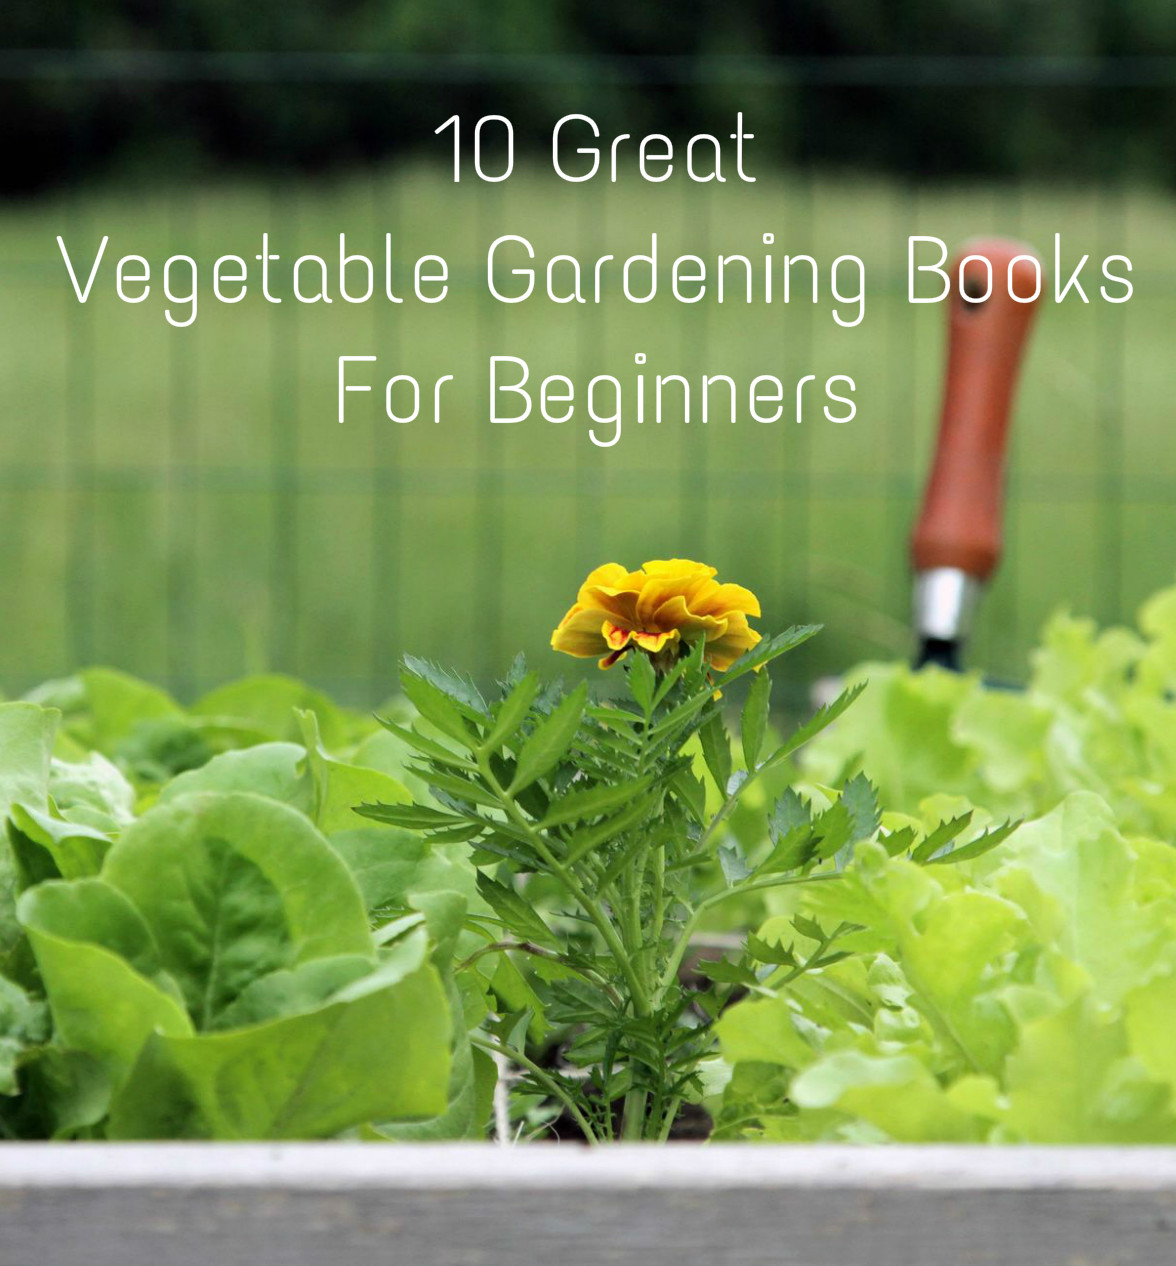 tips for gardening at home